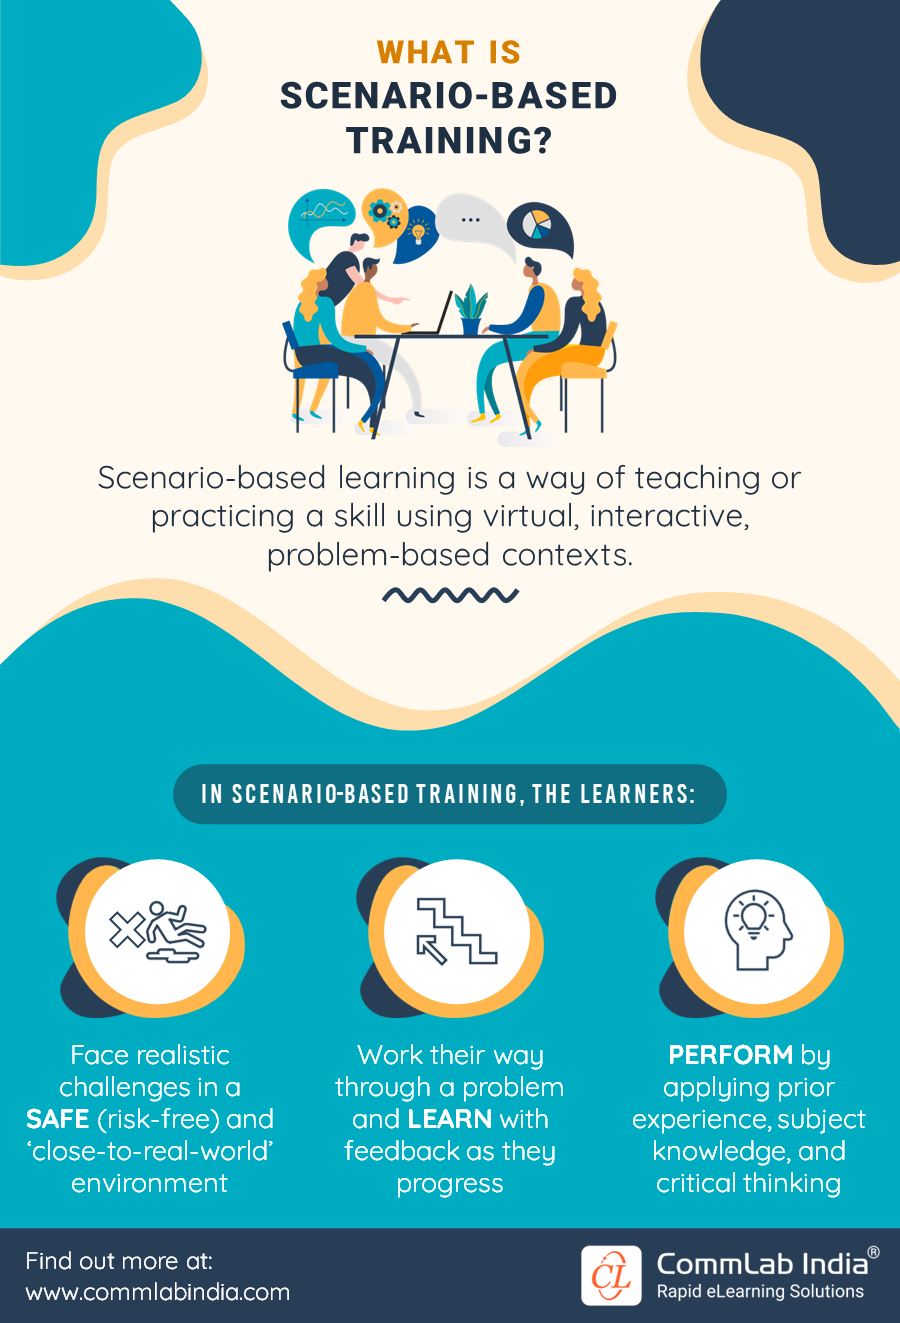 What is Scenario-based Learning